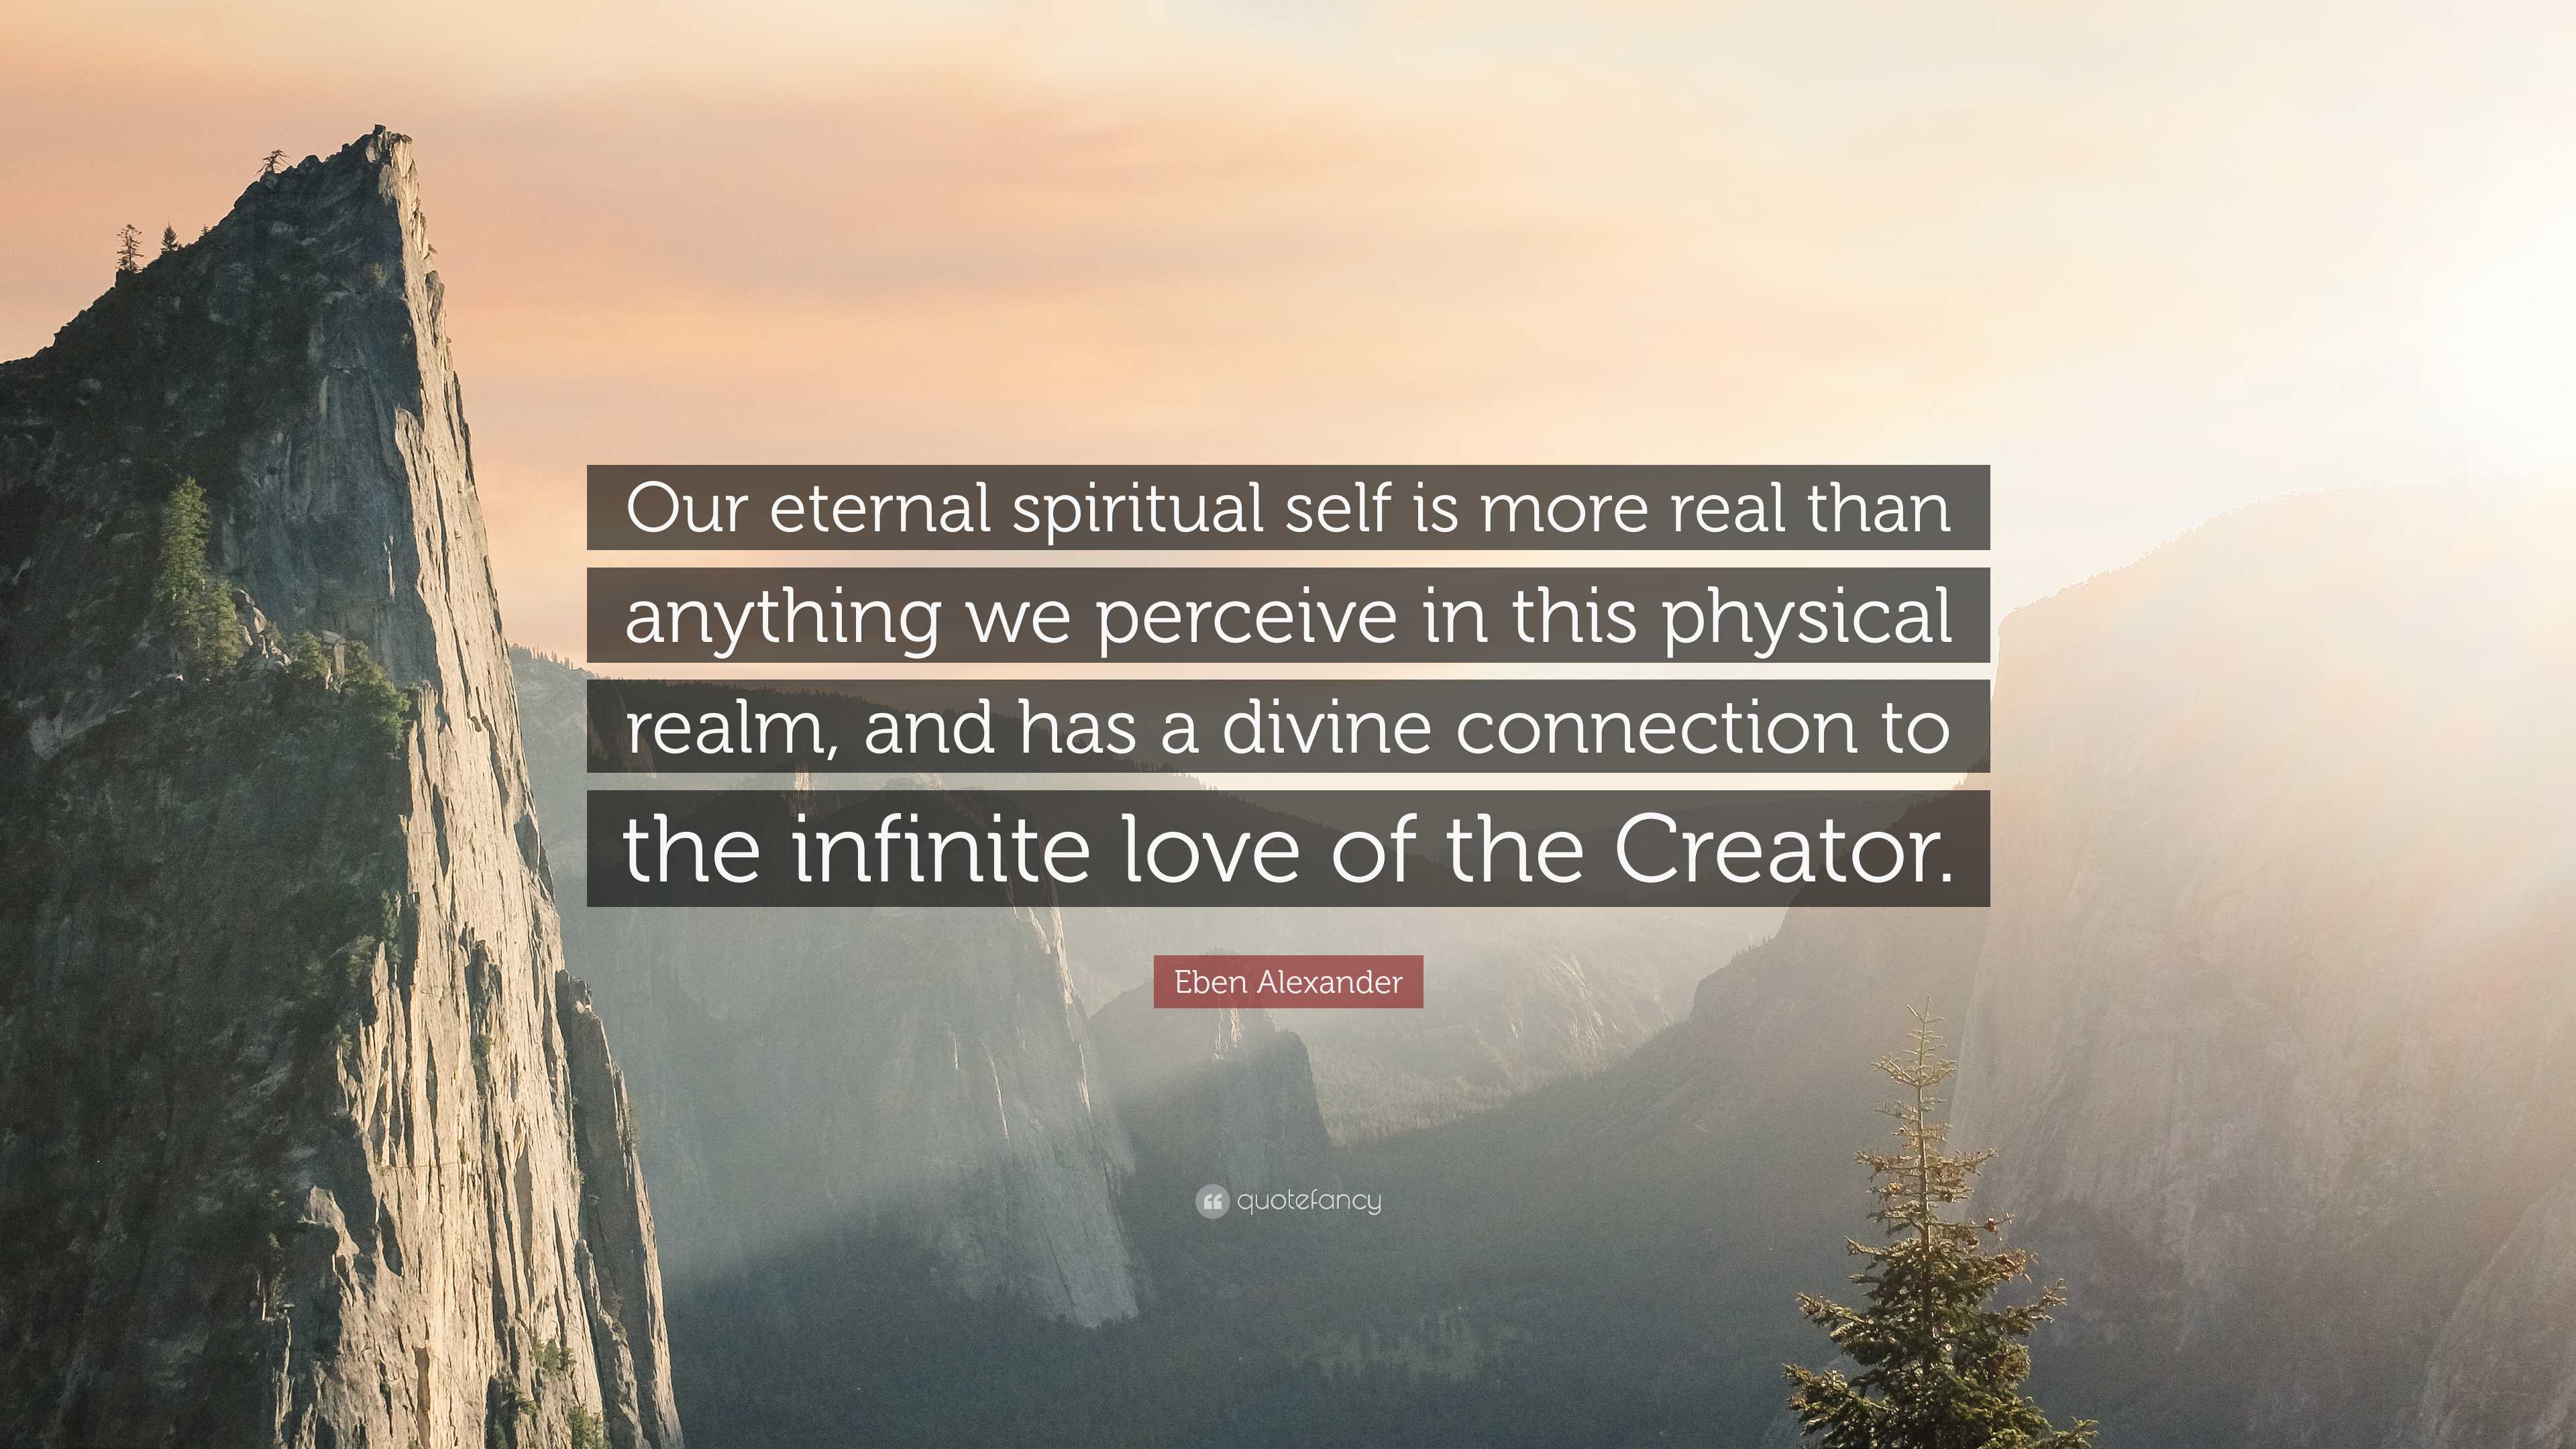 Eben Alexander Quote: “Our eternal spiritual self is more real than  anything we perceive in this physical realm, and has a divine connection  to”